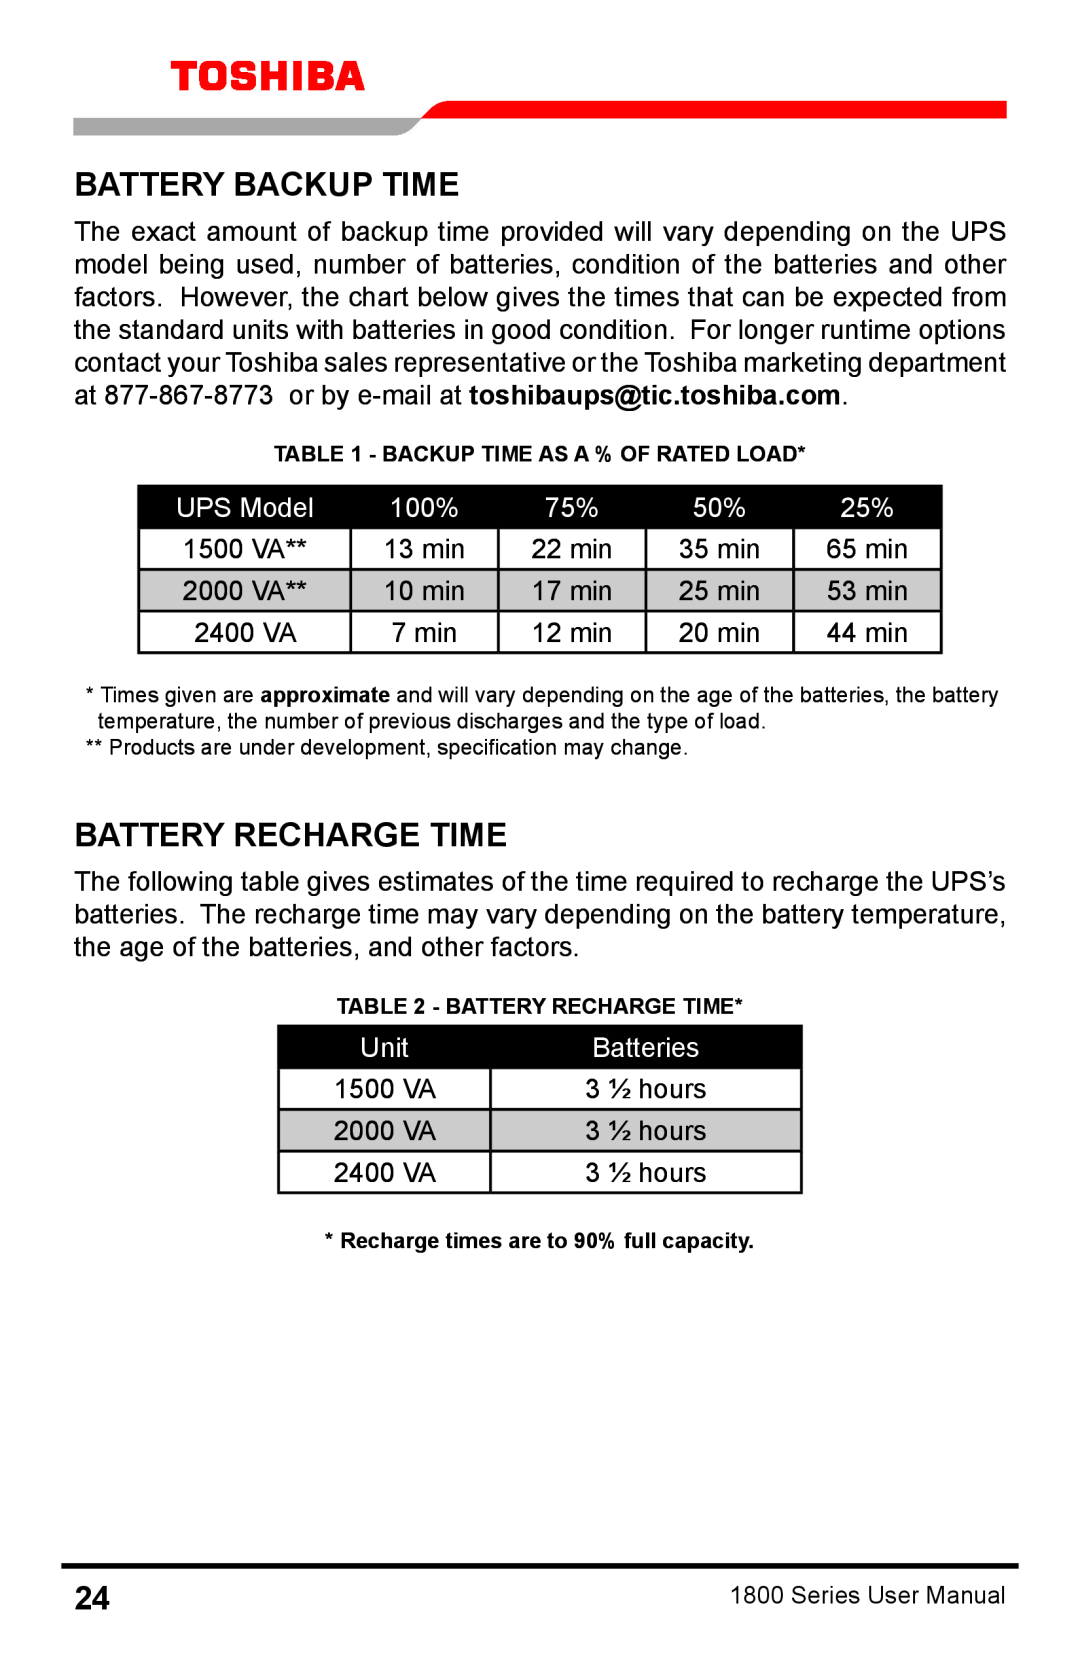 Toshiba 1800 manual Battery Backup Time, Battery Recharge Time, UPS Model, 100%, Unit, Batteries 